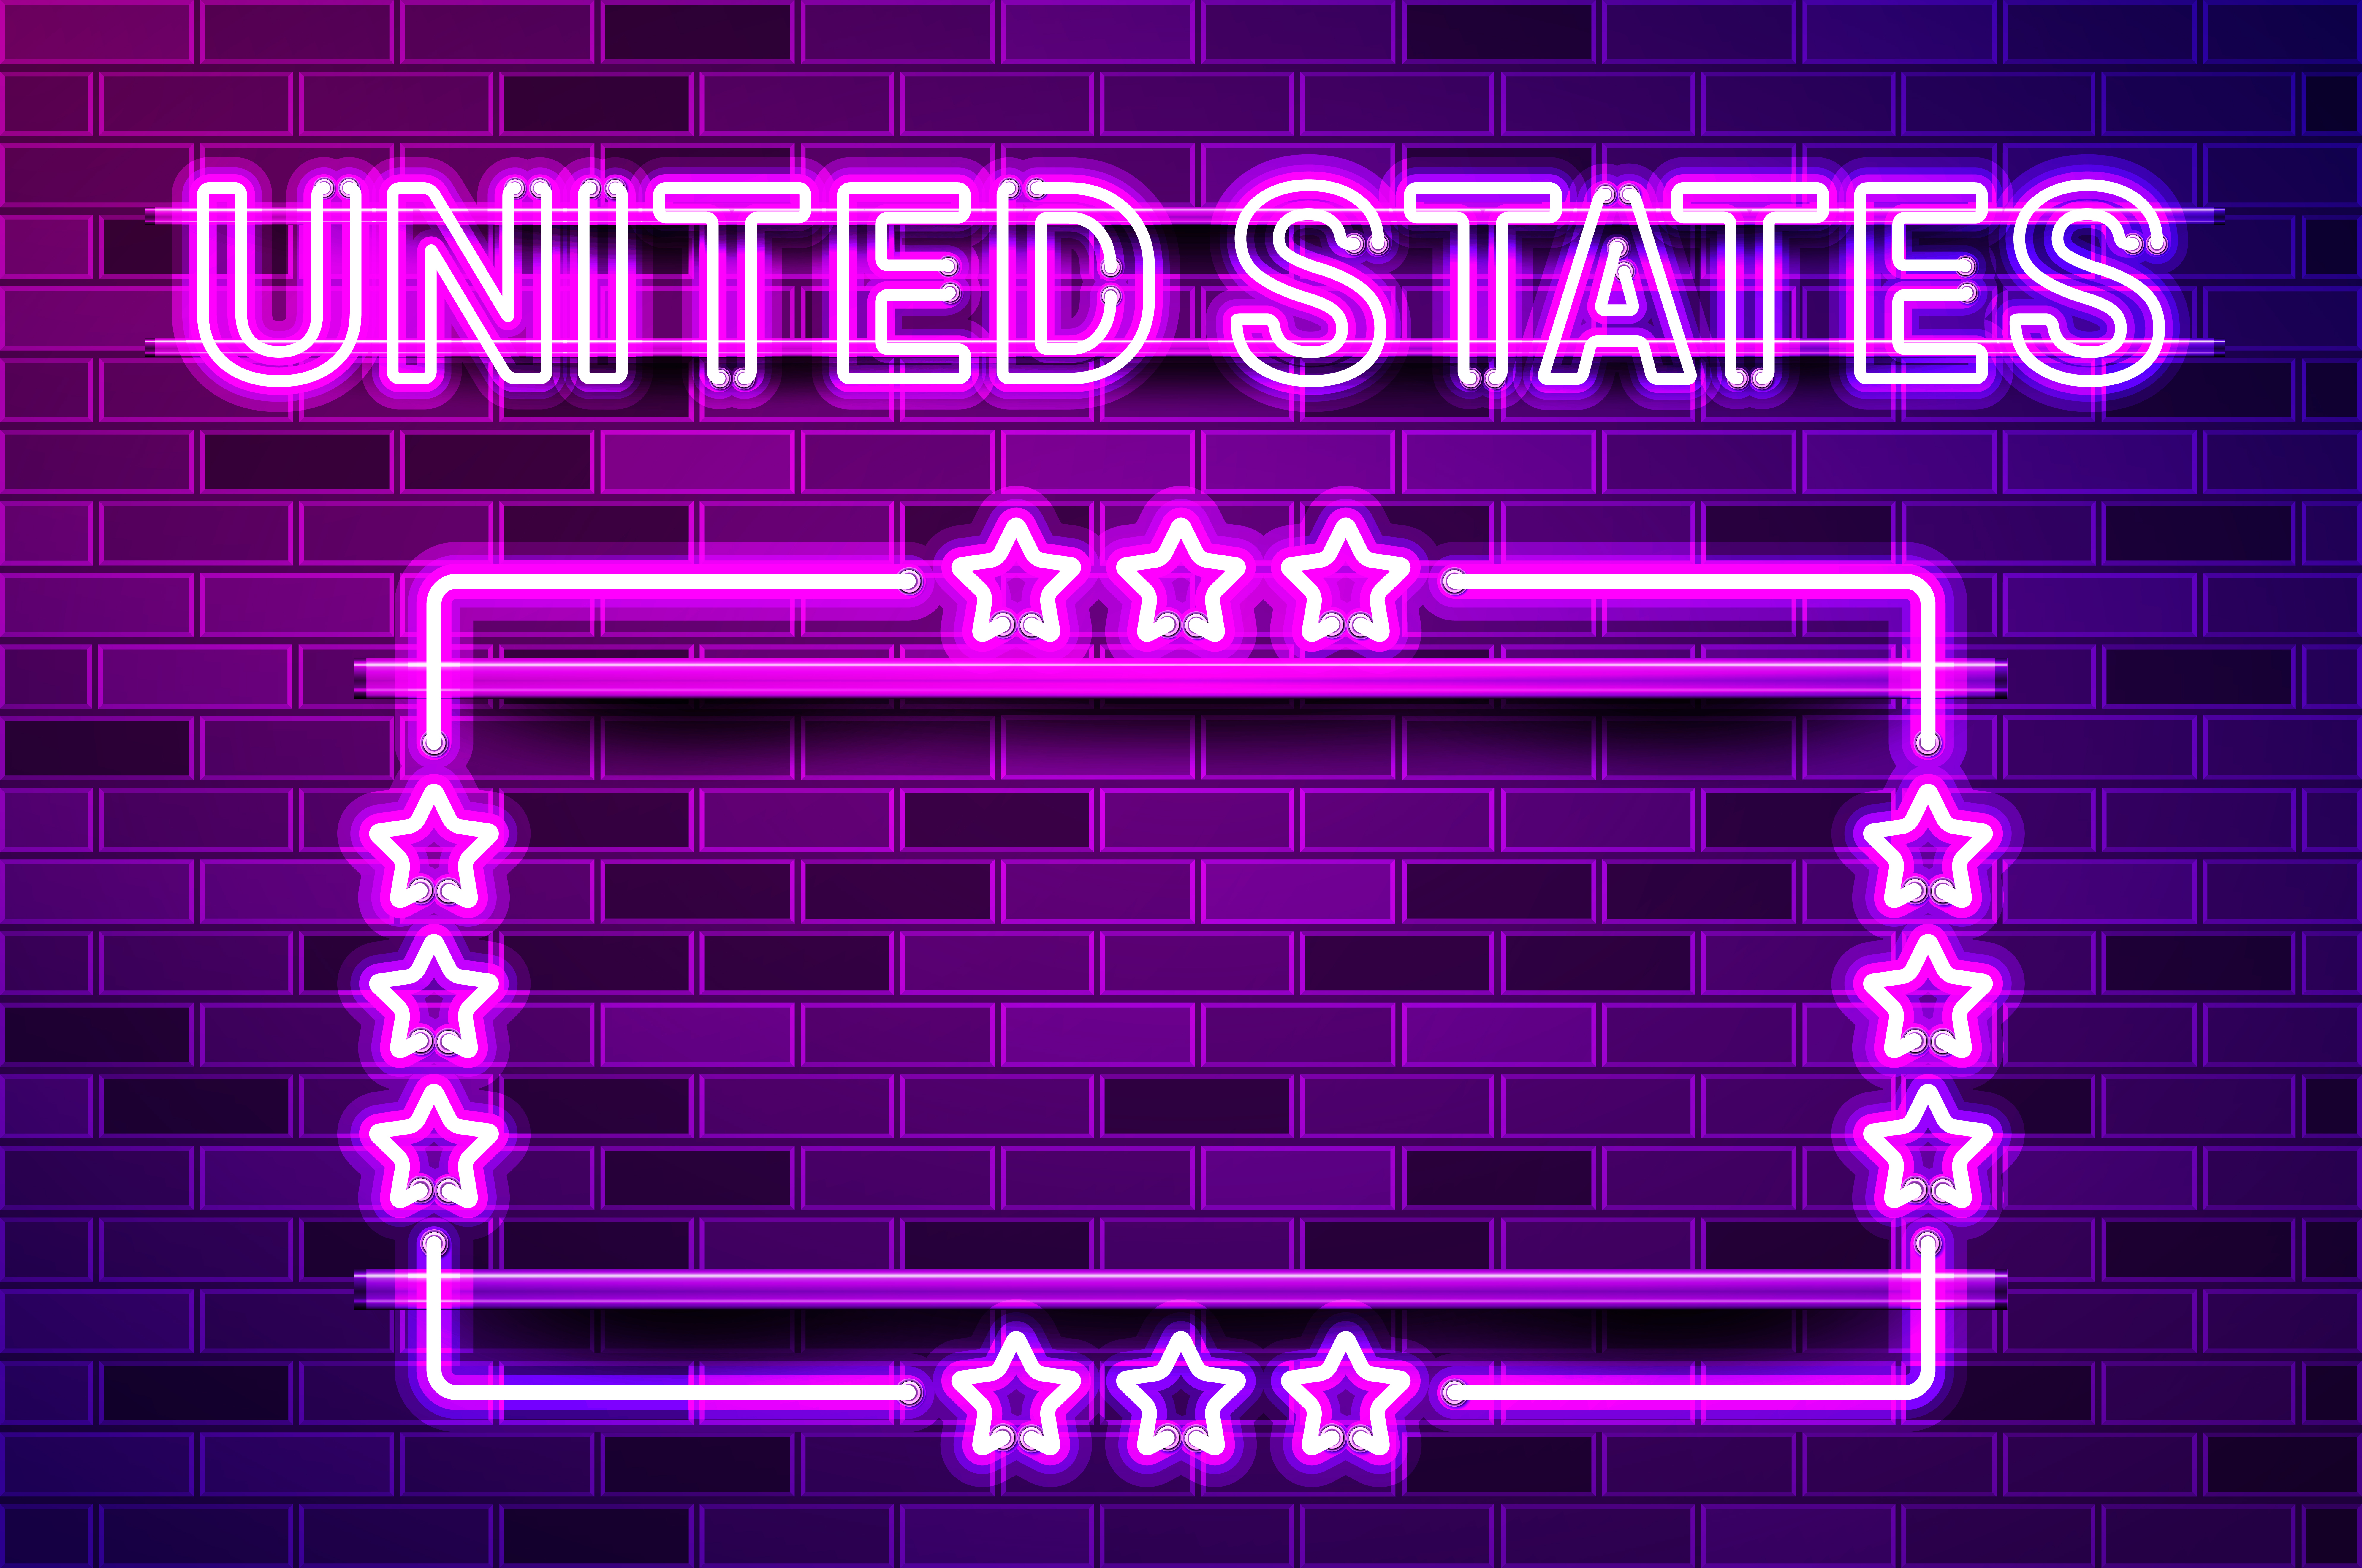 United States glowing purple neon lettering and a rectangular frame with stars. Realistic vector illustration. Purple brick wall, violet glow, metal holders.. United States glowing purple neon lettering and a rectangular frame with stars